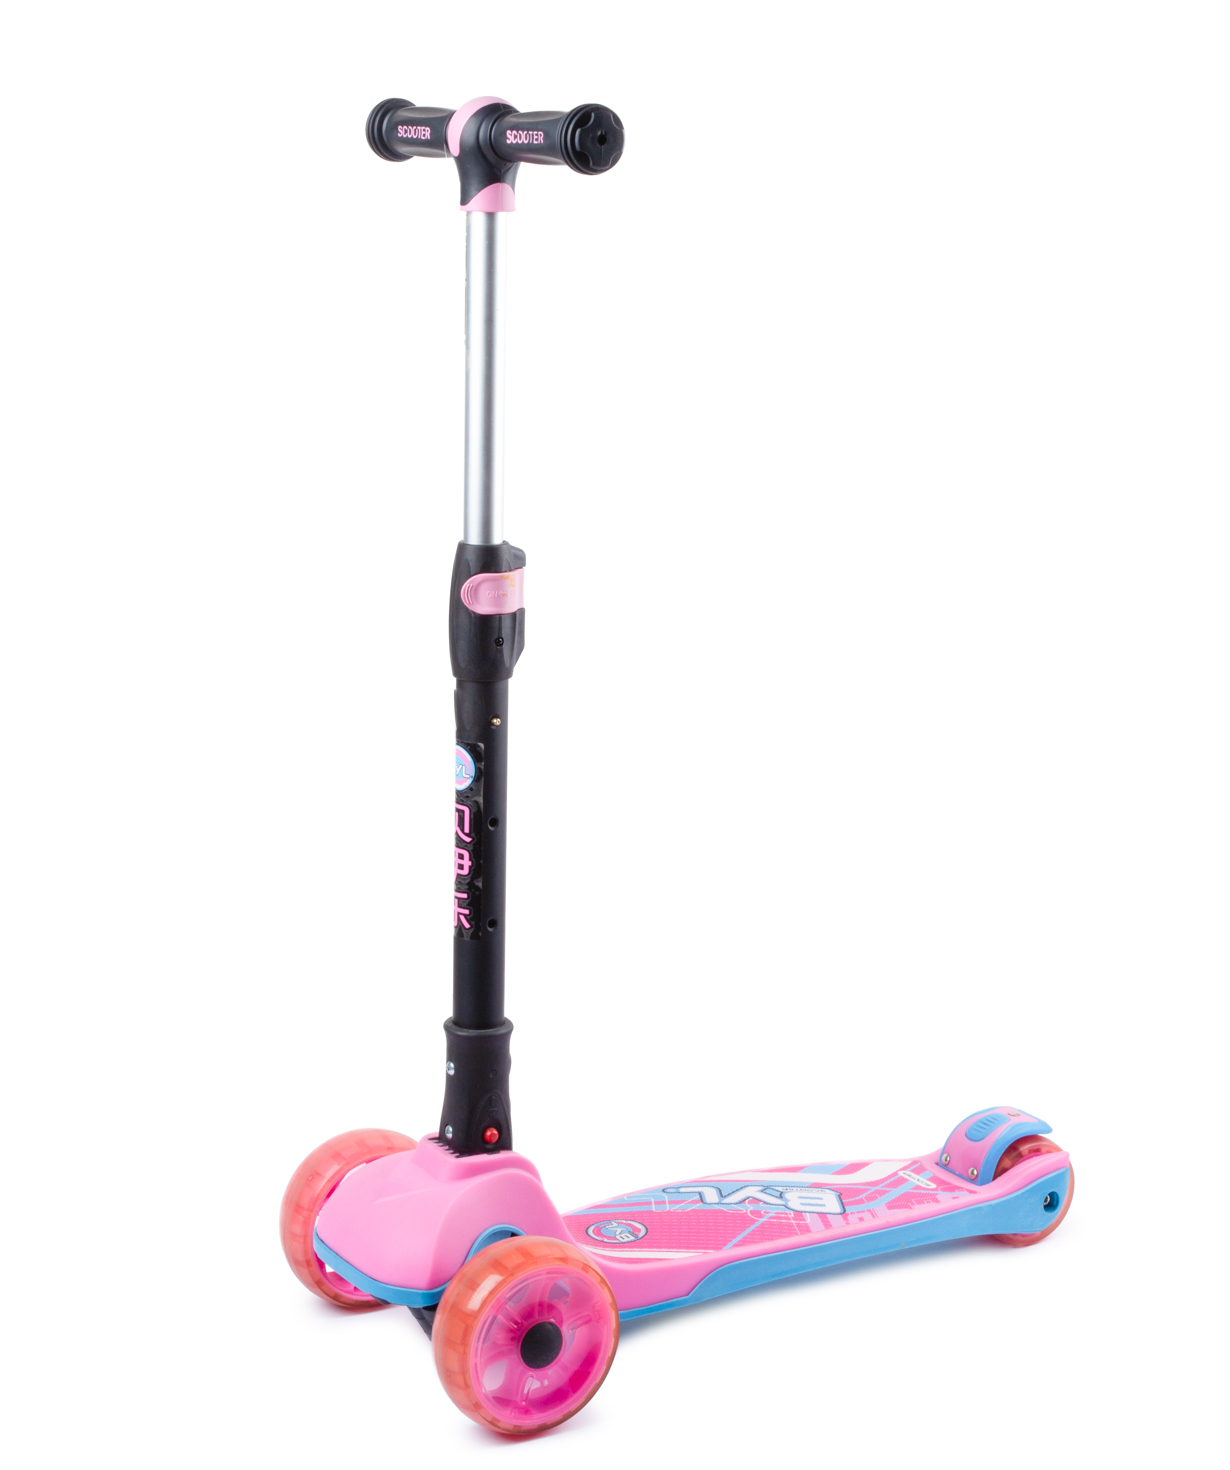 Scooter PE-9921 with light effect